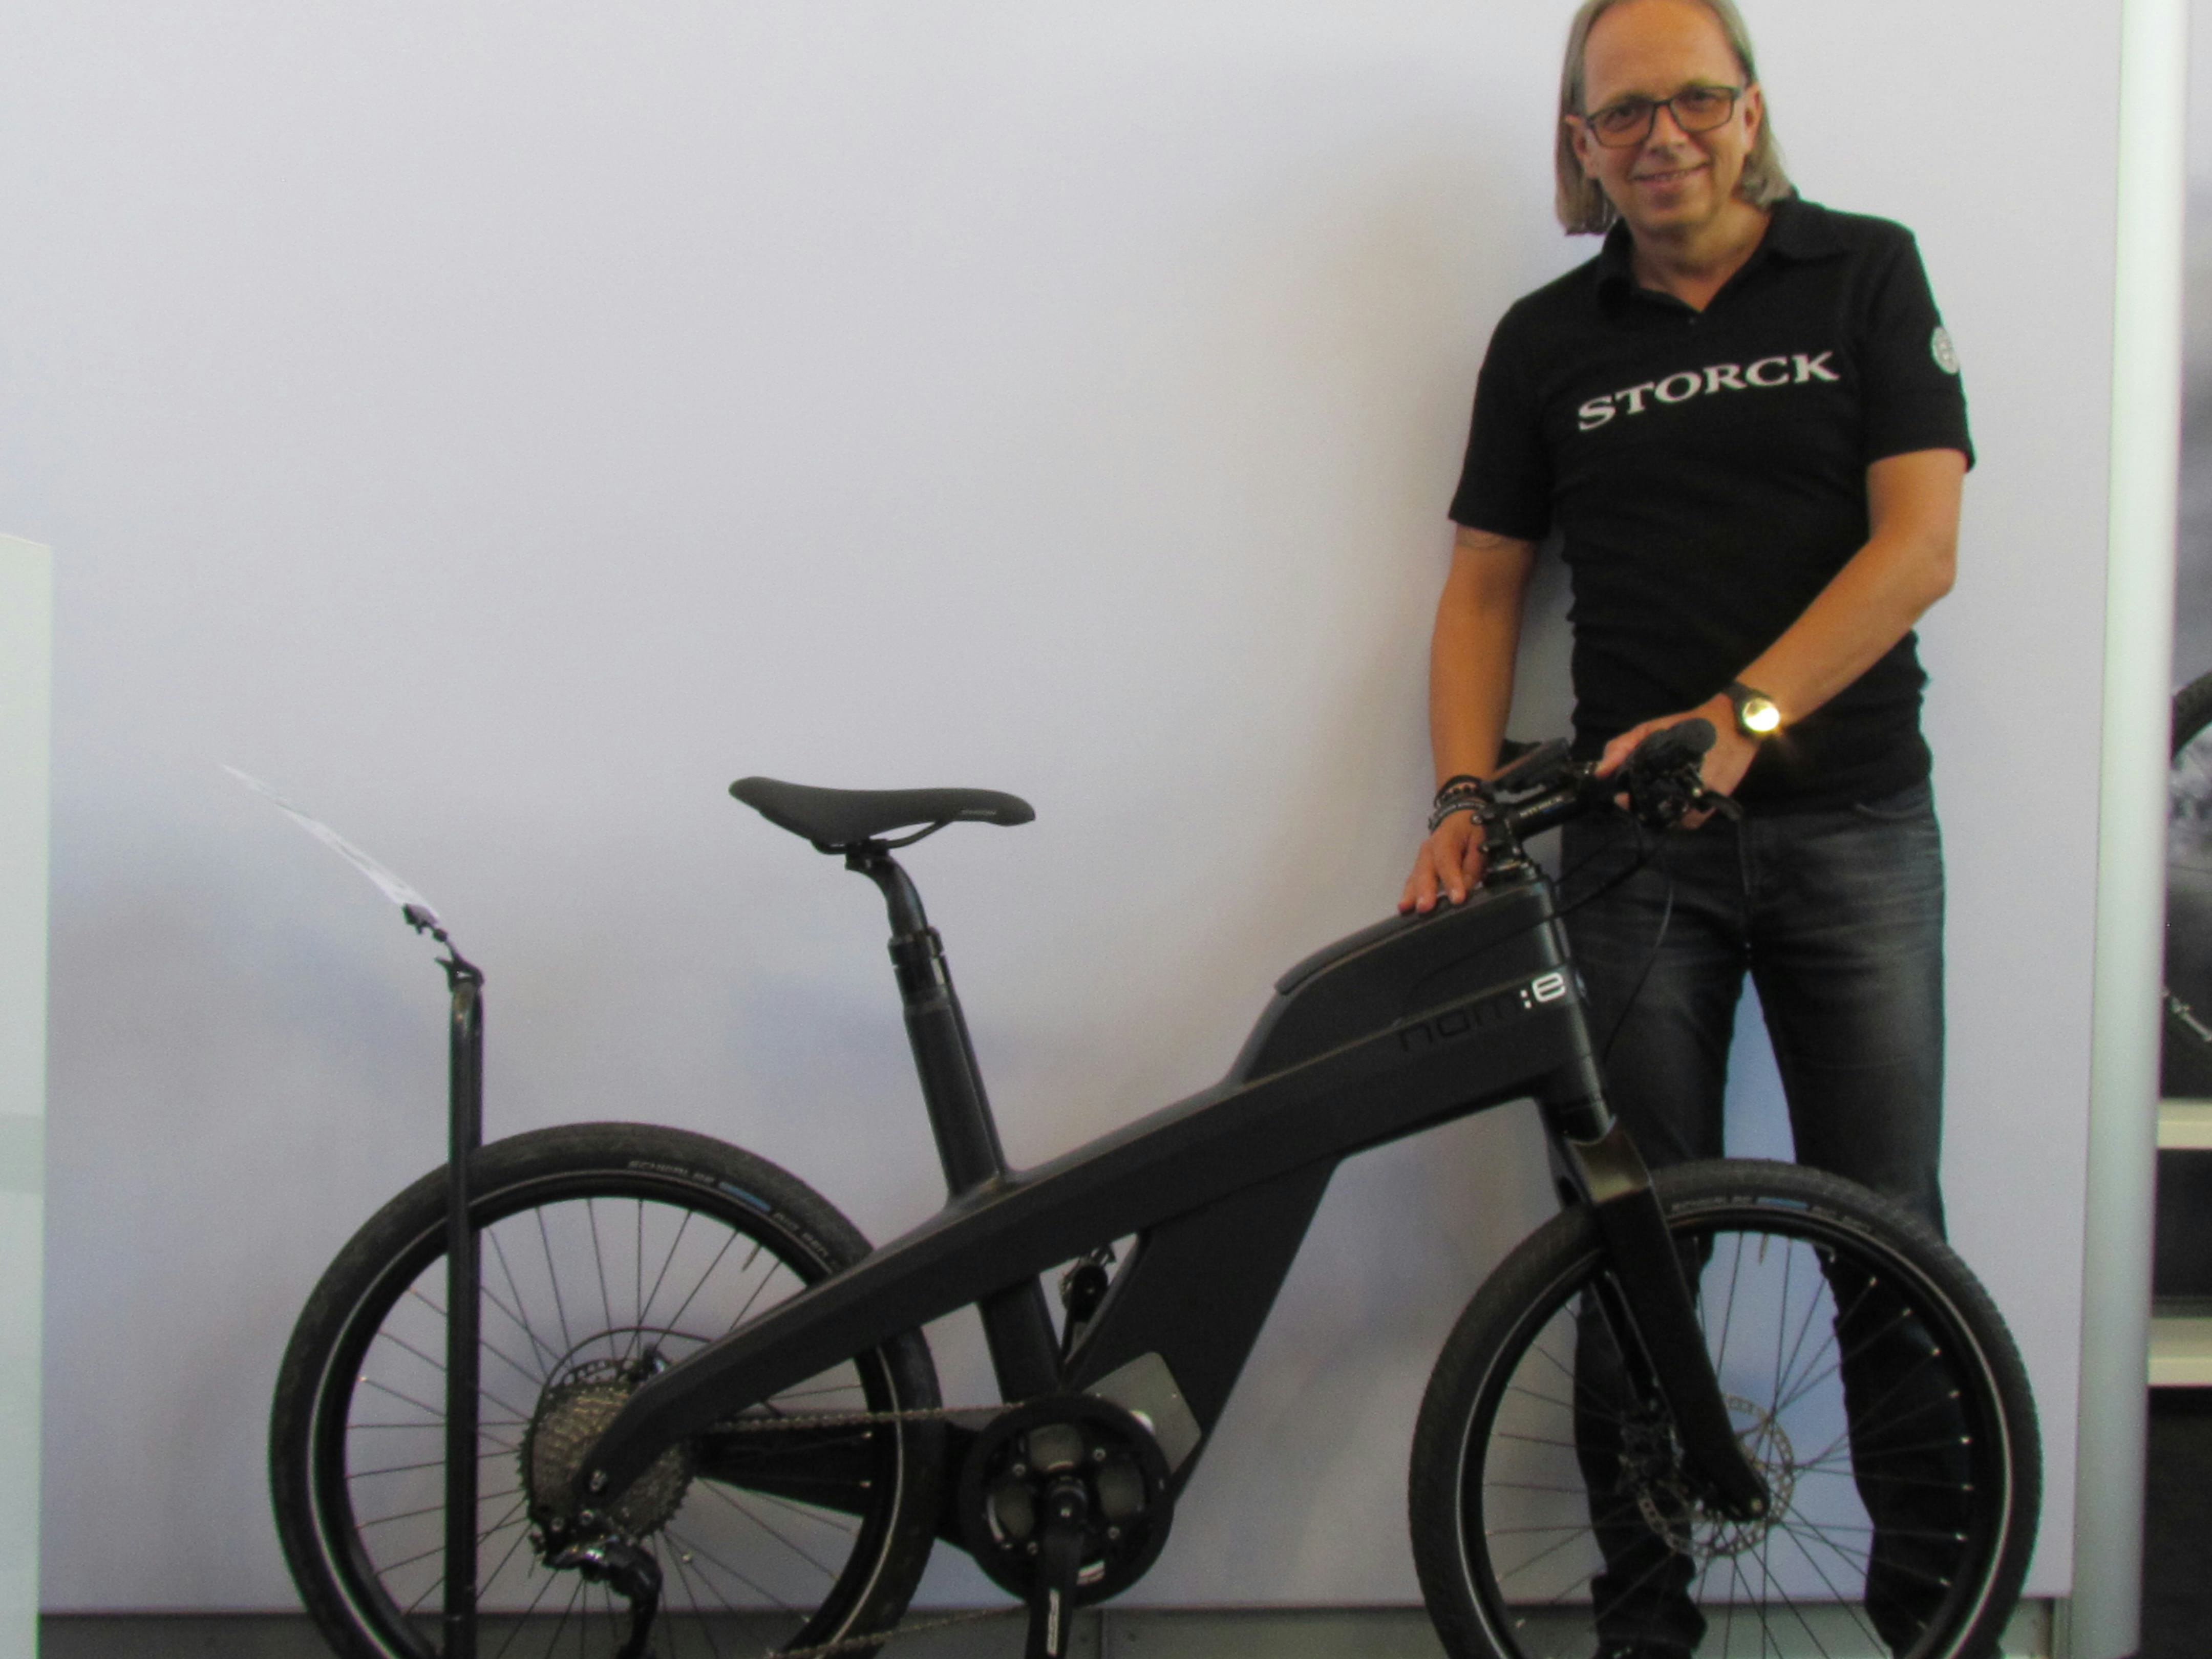 According to Markus Storck e-bikes with the special composite frames that integrate motor, battery and control unit is in 2017 to be sold for about 3,000 euro retail. – Photo Bike Europe